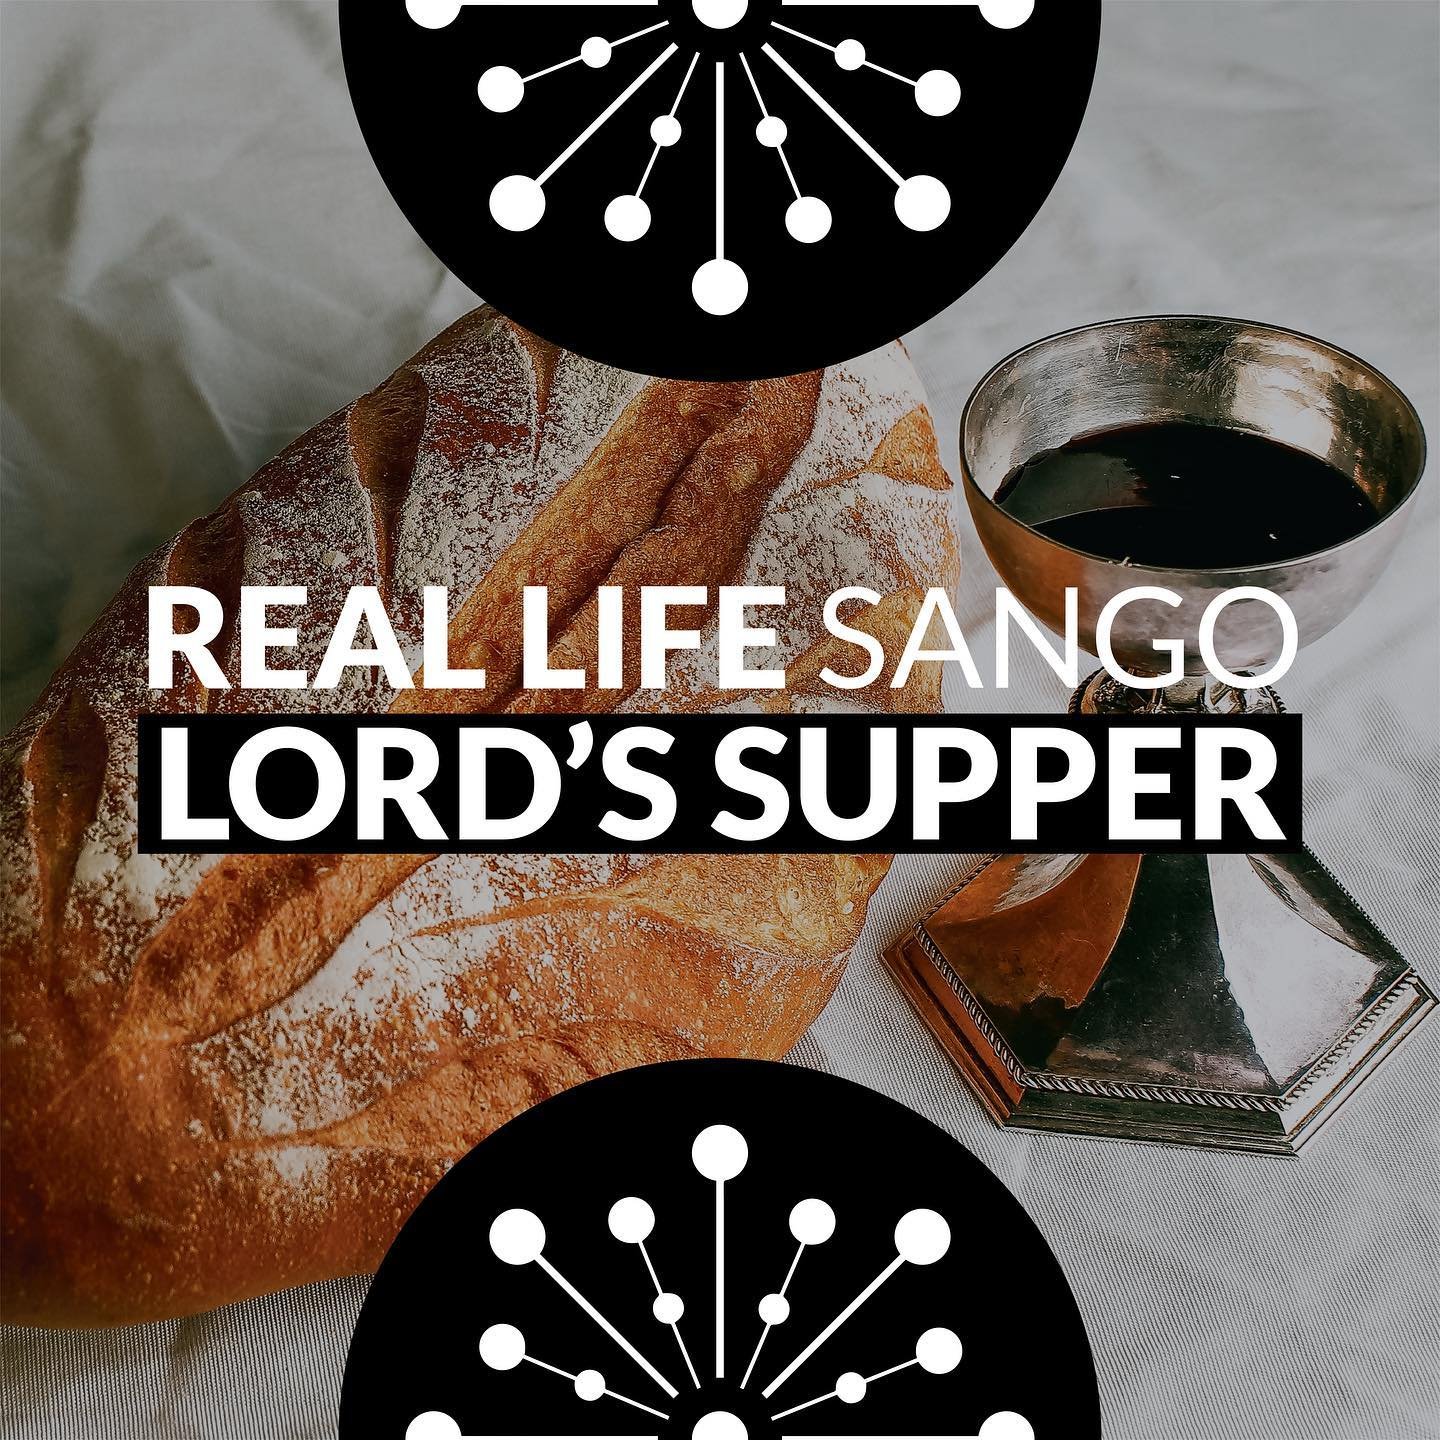 🔍 Check out what&rsquo;s happening at Real Life! Text &ldquo;mission&rdquo; to 97000 for event details and sign-ups.

&bull;Lord&rsquo;s Supper this Sunday
&bull;Lead a Summer Study
&bull;Baby and Child Dedication
&bull;Graduate Sunday
&bull;Color W